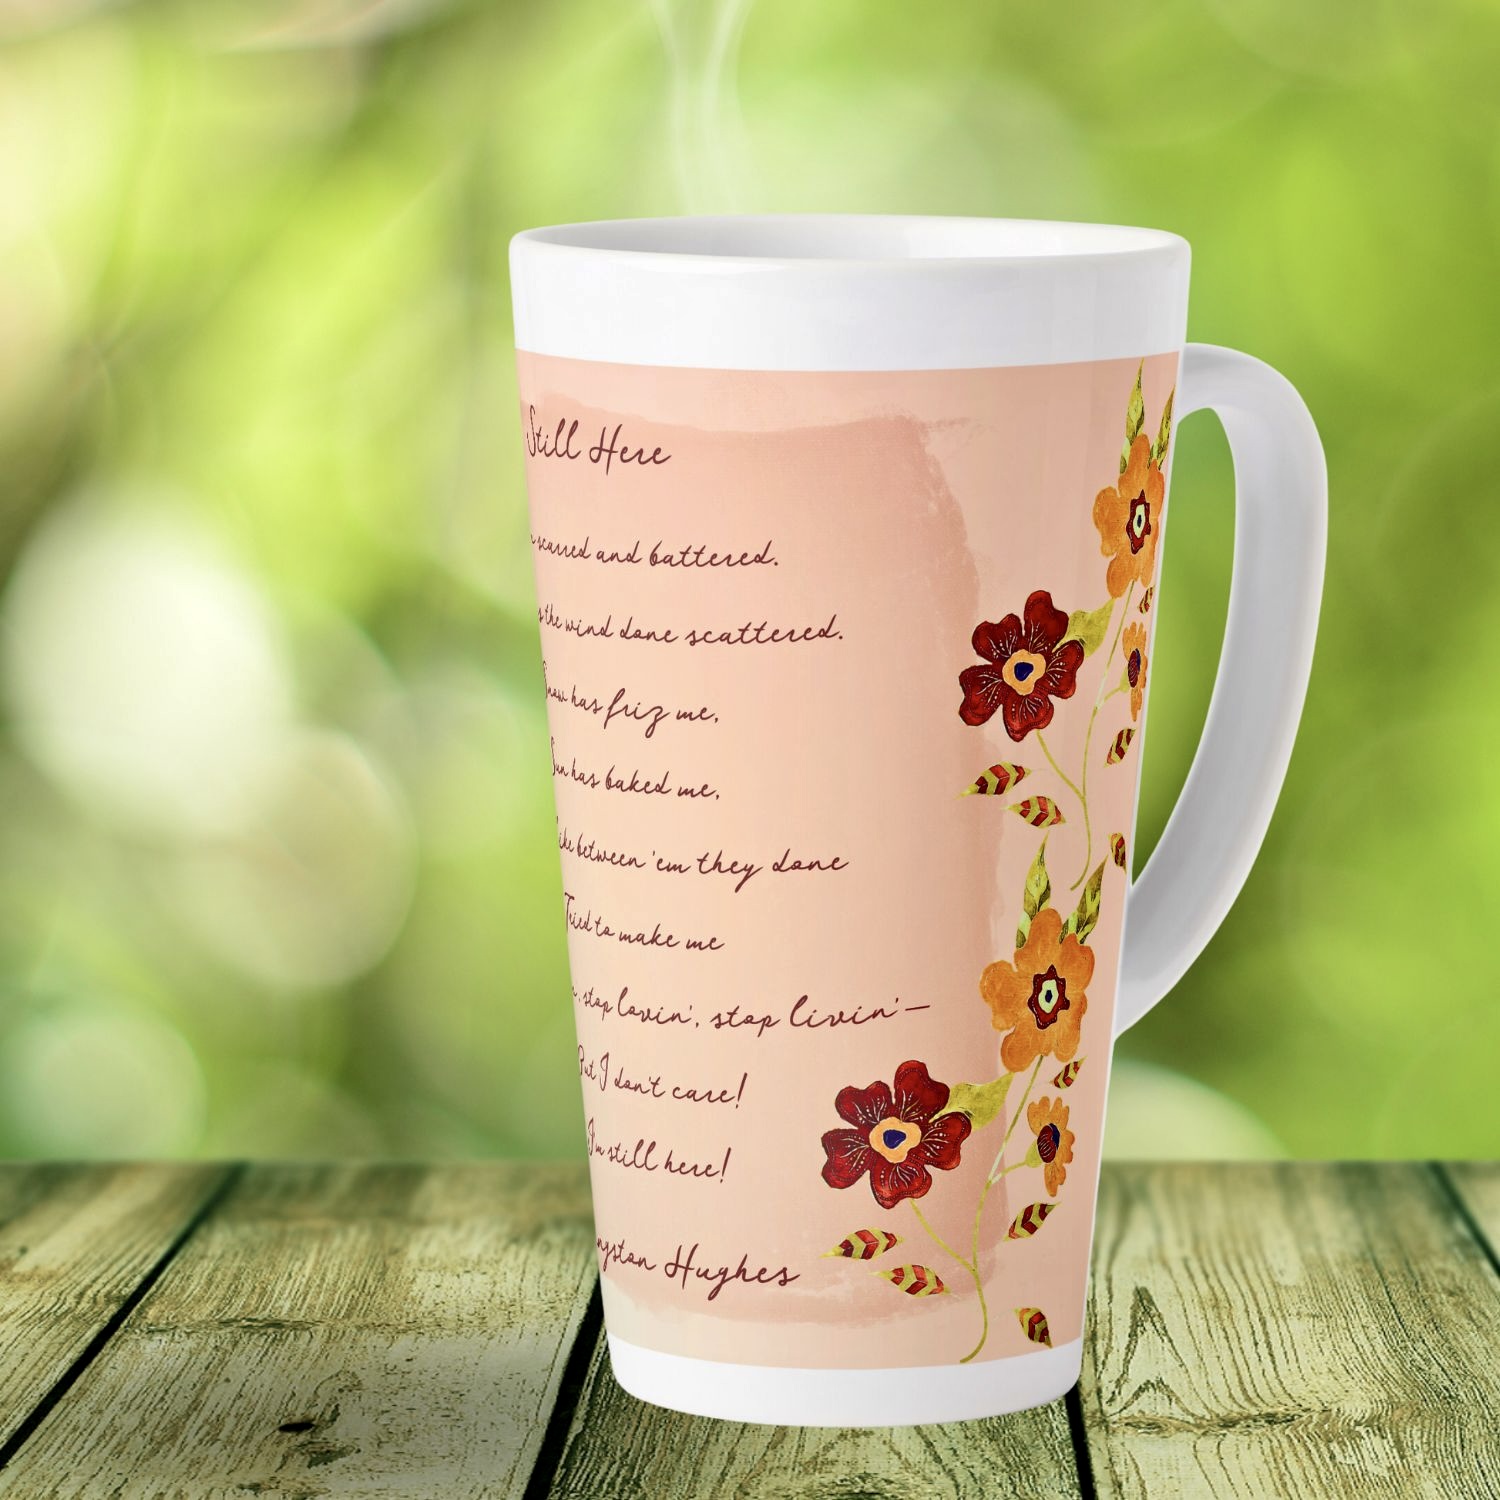 "Latte coffee mug featuring delicate watercolor flowers and a coral-toned mandala design, complemented by an excerpt from Langston Hughes' poem 'Still Here'."